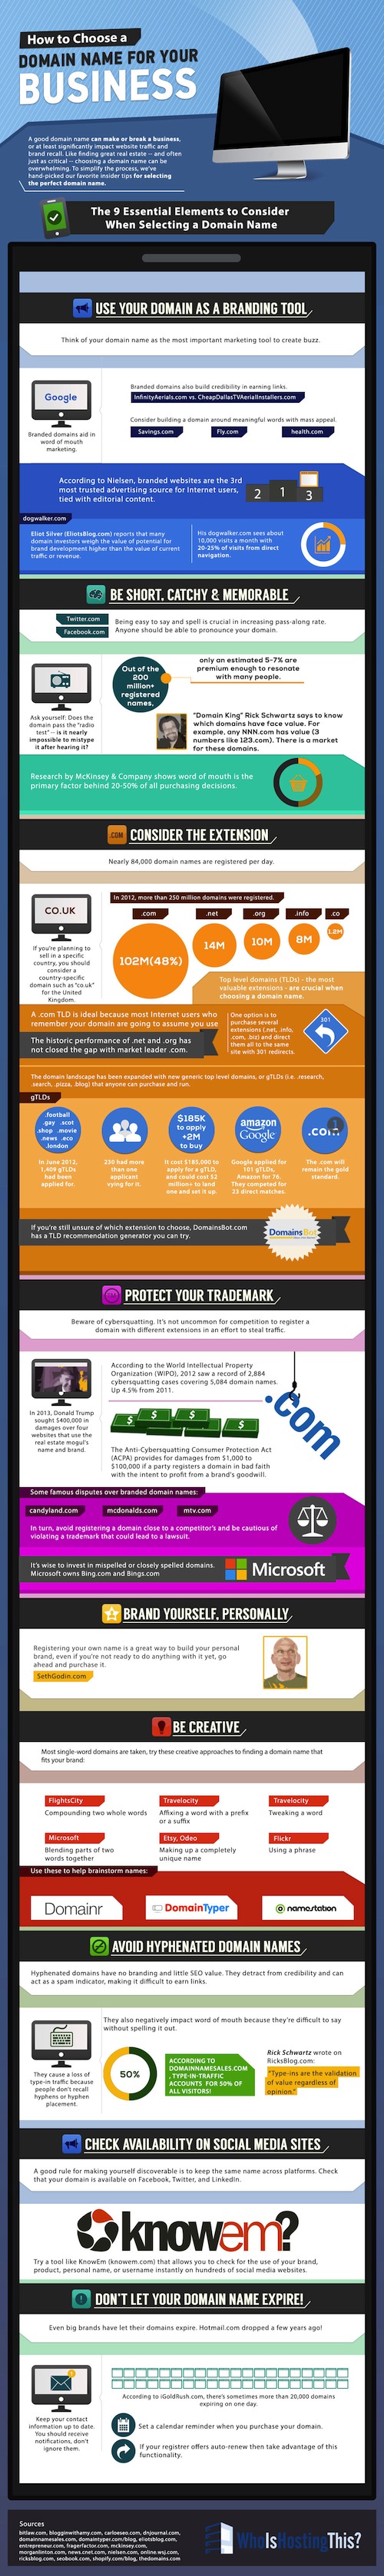 9-essential-elements-choosing-domain-name-infographic